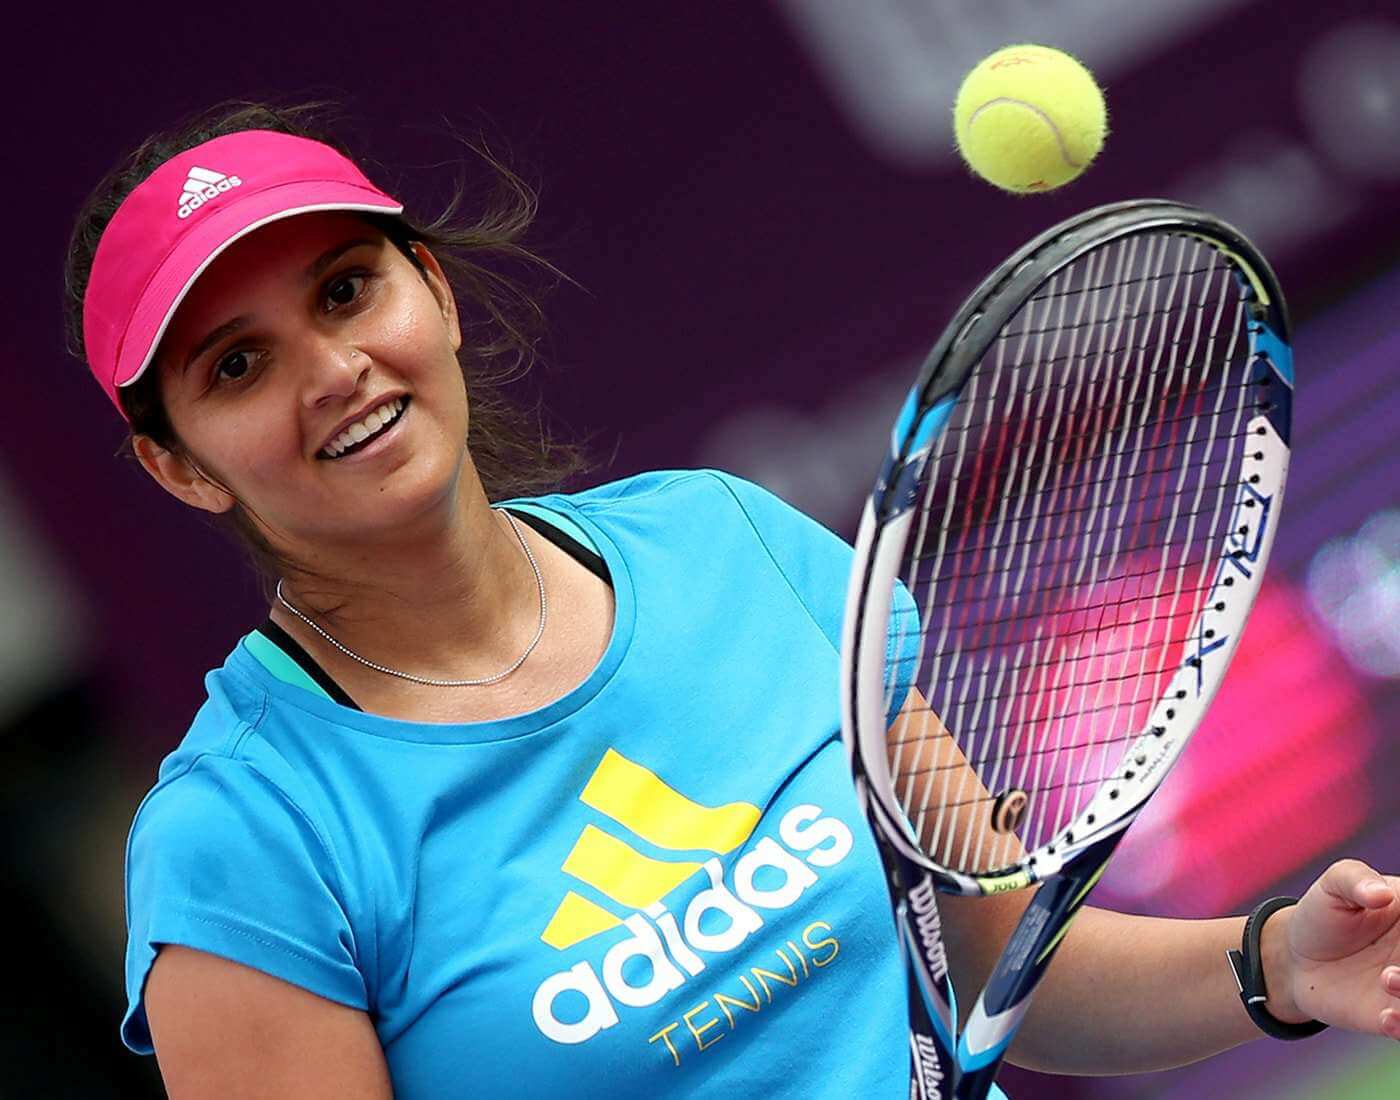 sania mirza min 1489655423 1847 My goal is to return by 2020 Olympics after having baby, says Sania Mirza